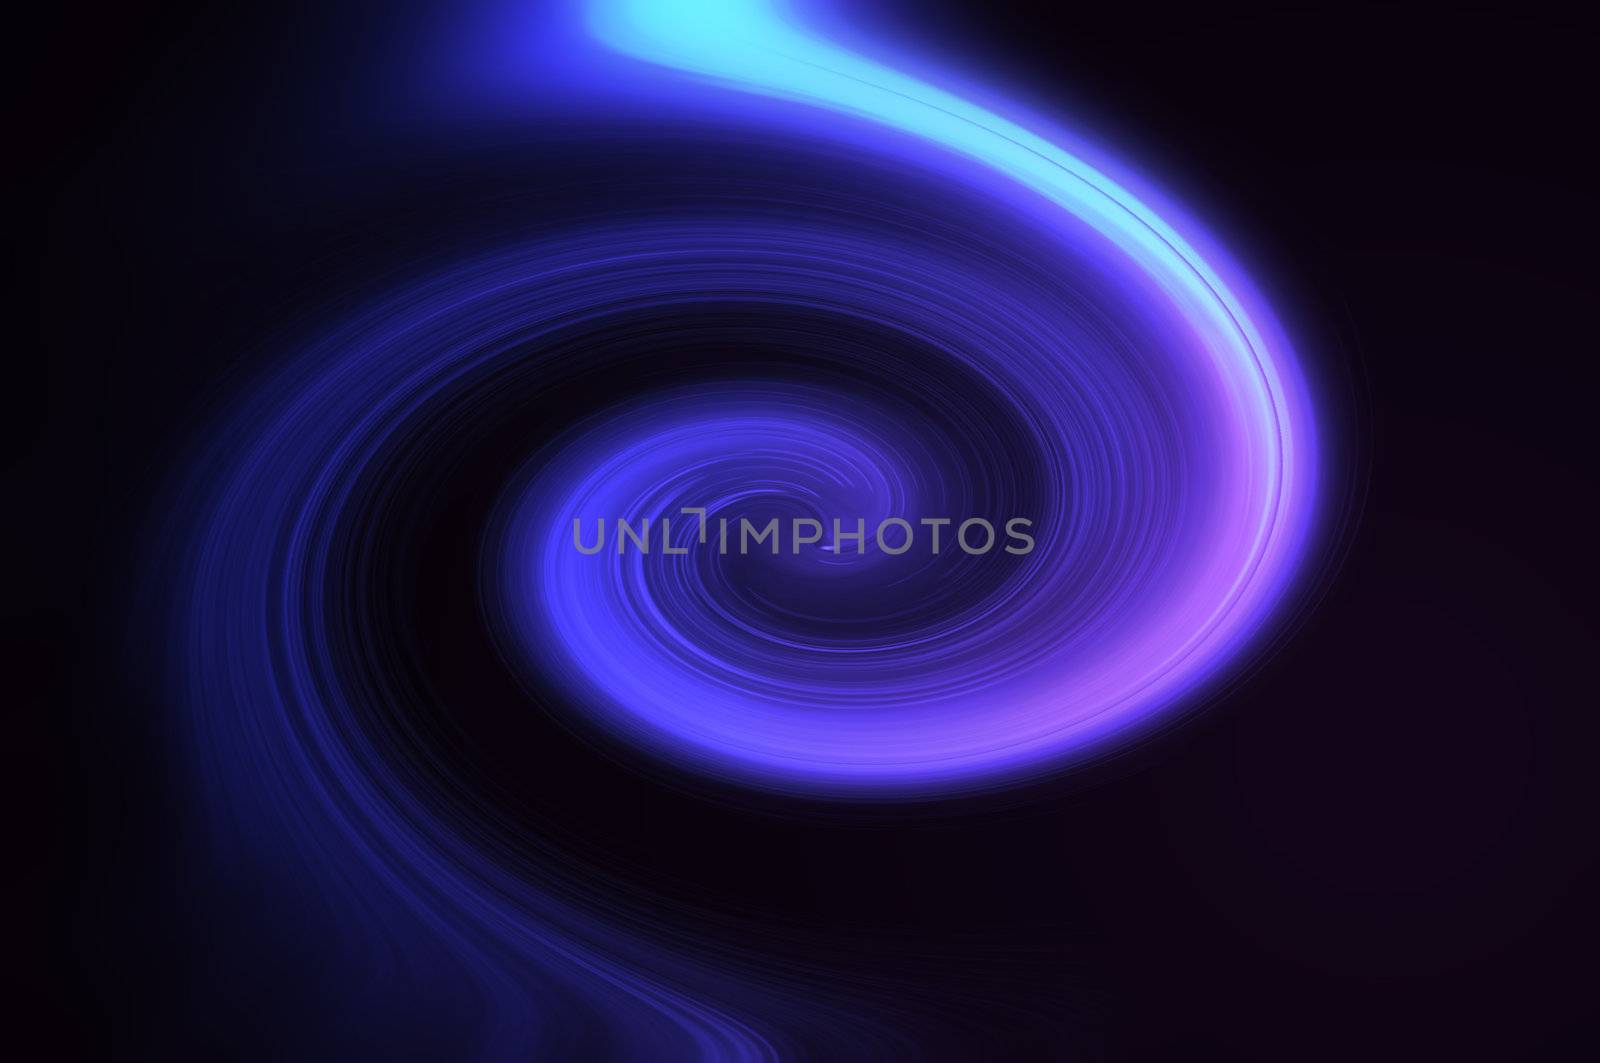 Abstract violet, blue and pink coloured light effect swirl against black background.